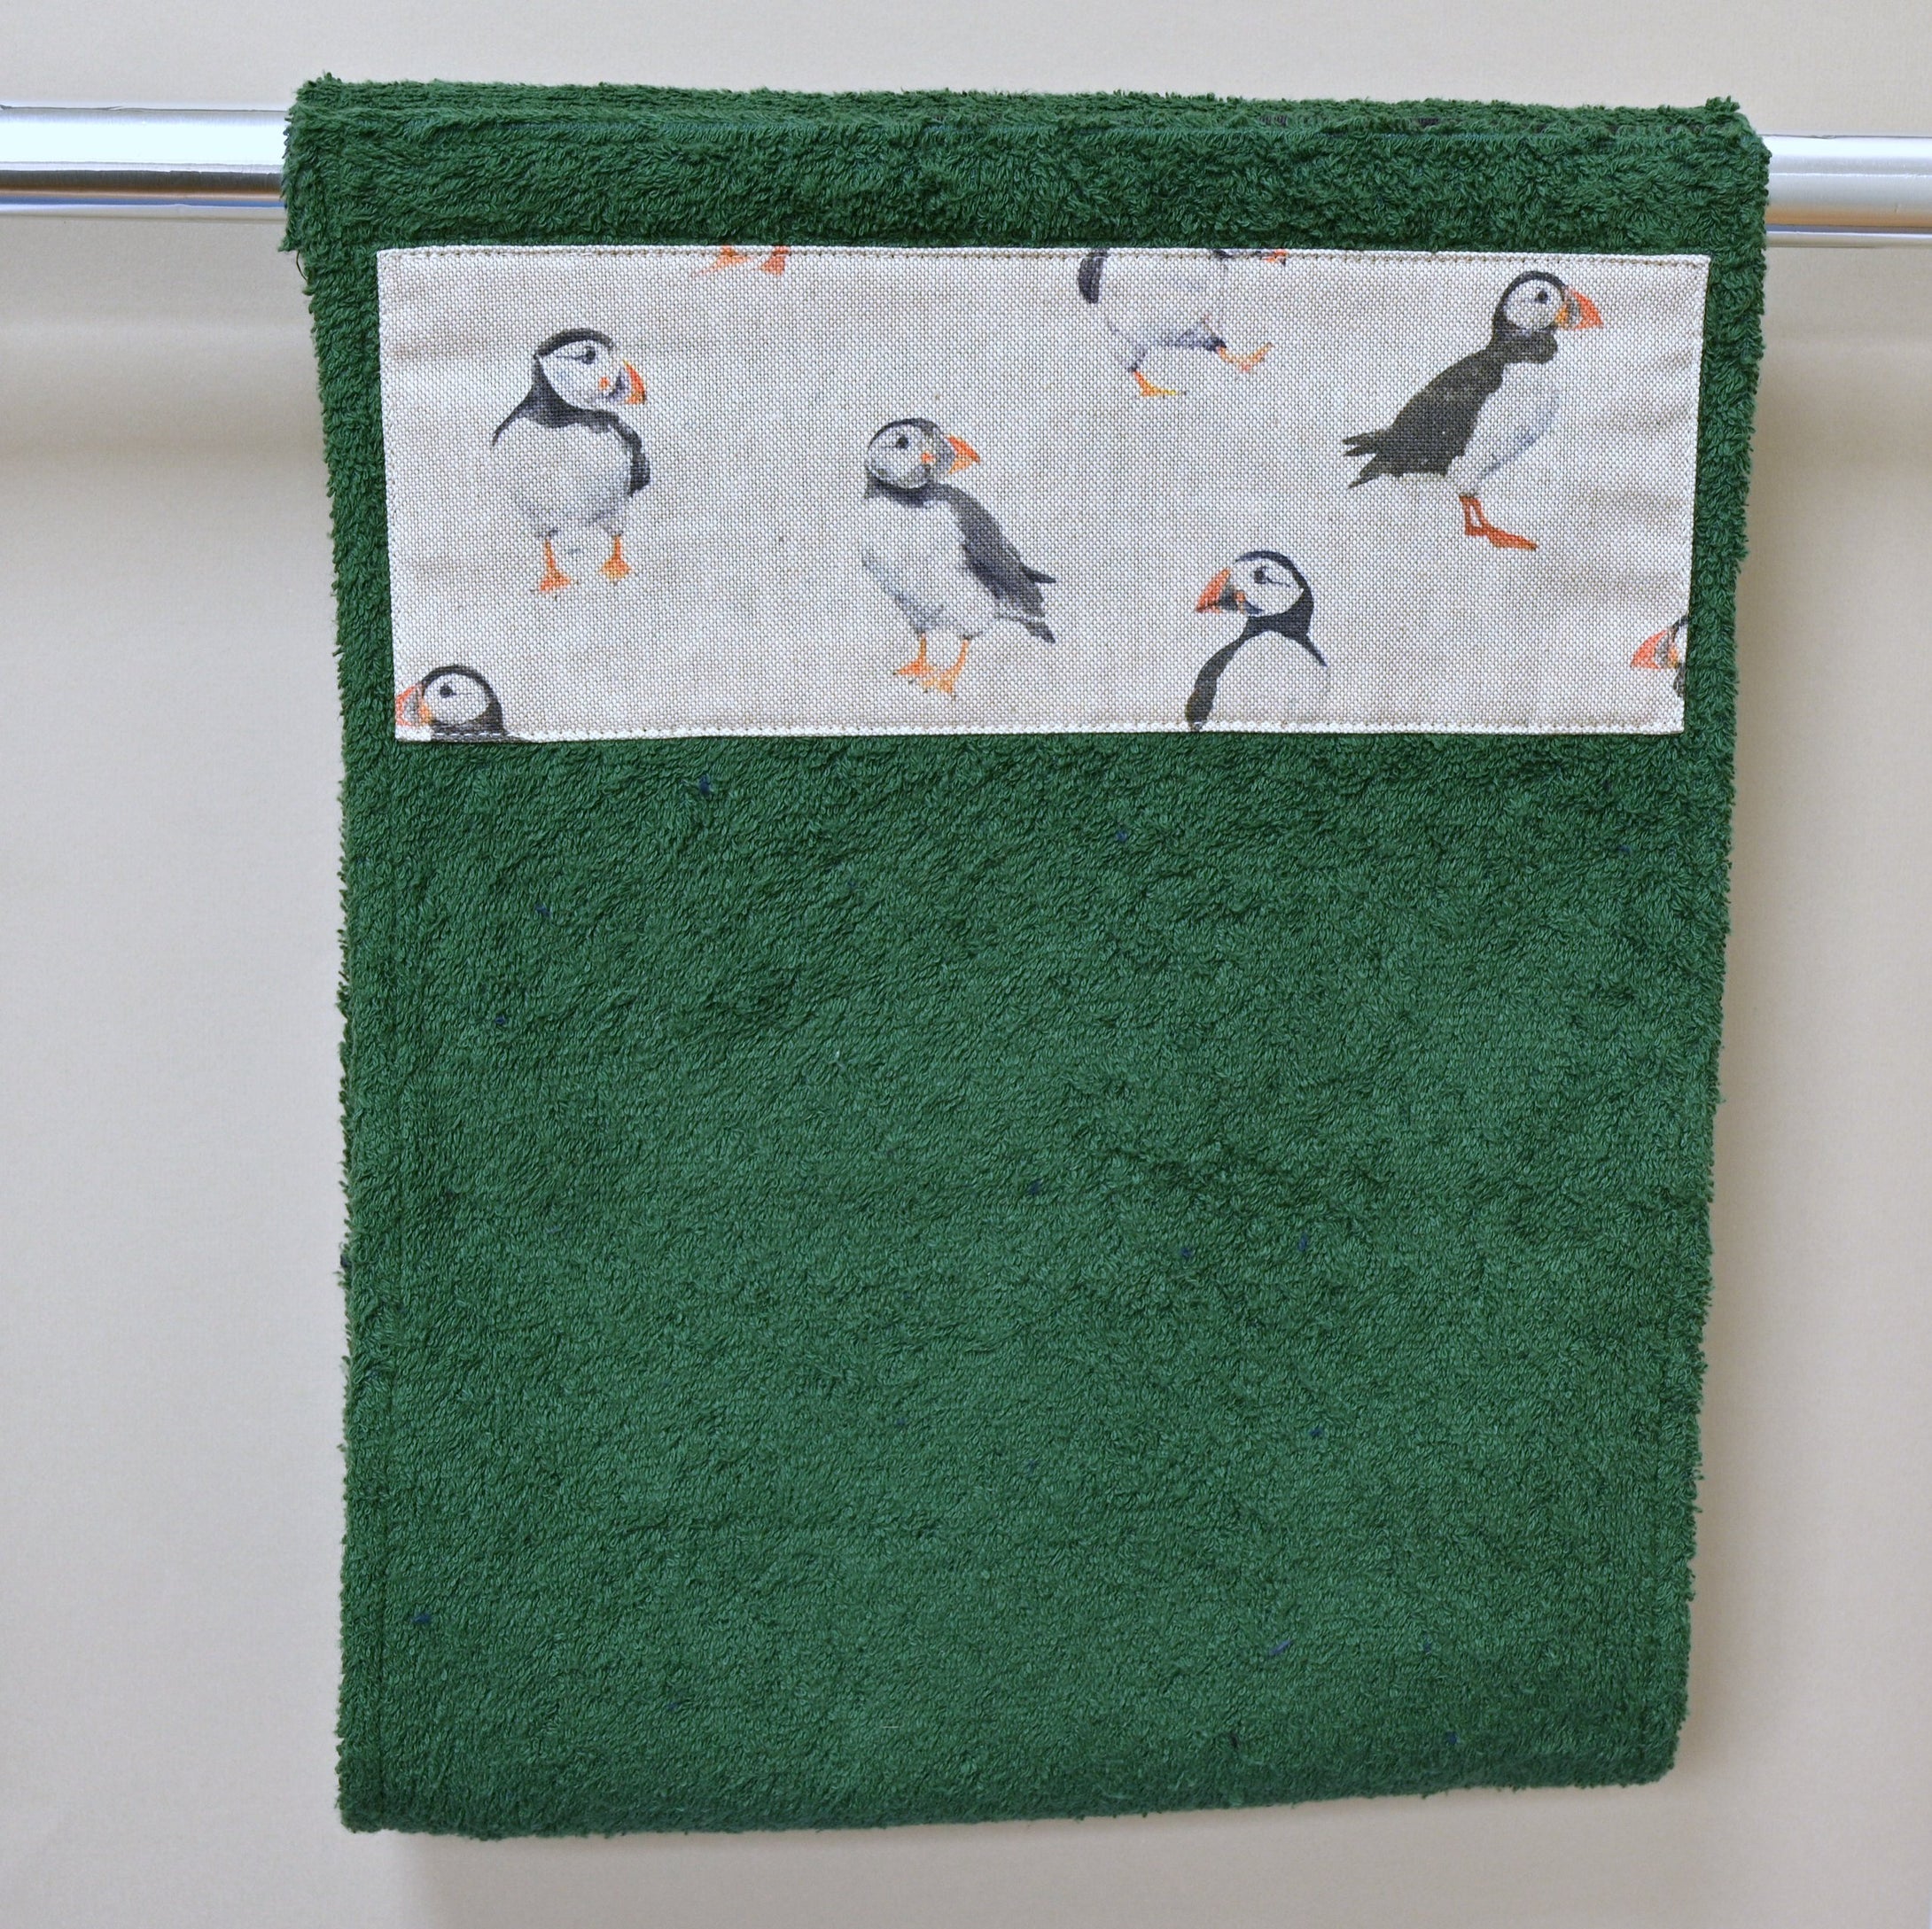 Hand Roller Towels, Puffins, Black, Navy Blue or Green Towel